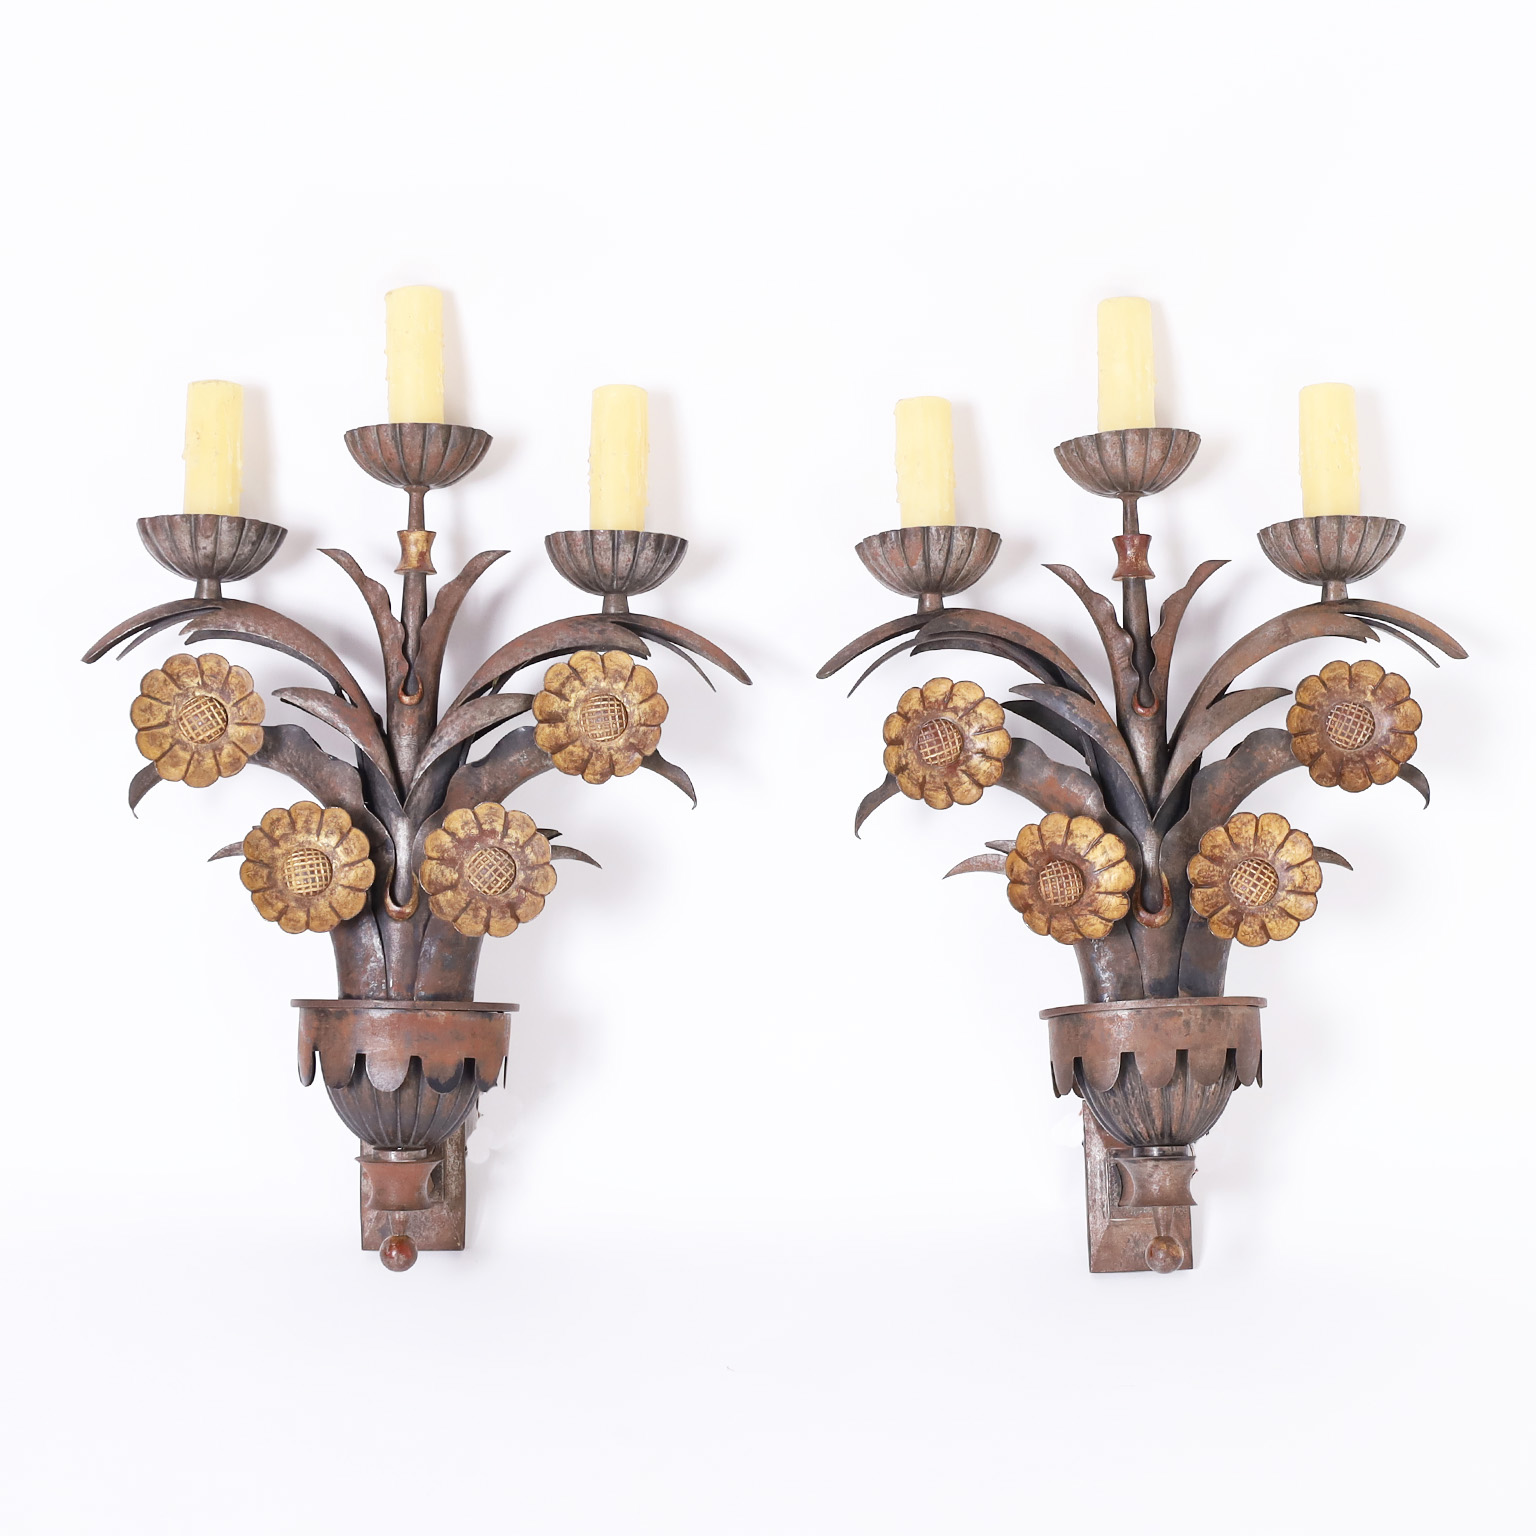 Antique Pair of French Art Deco Floral Wall Sconces